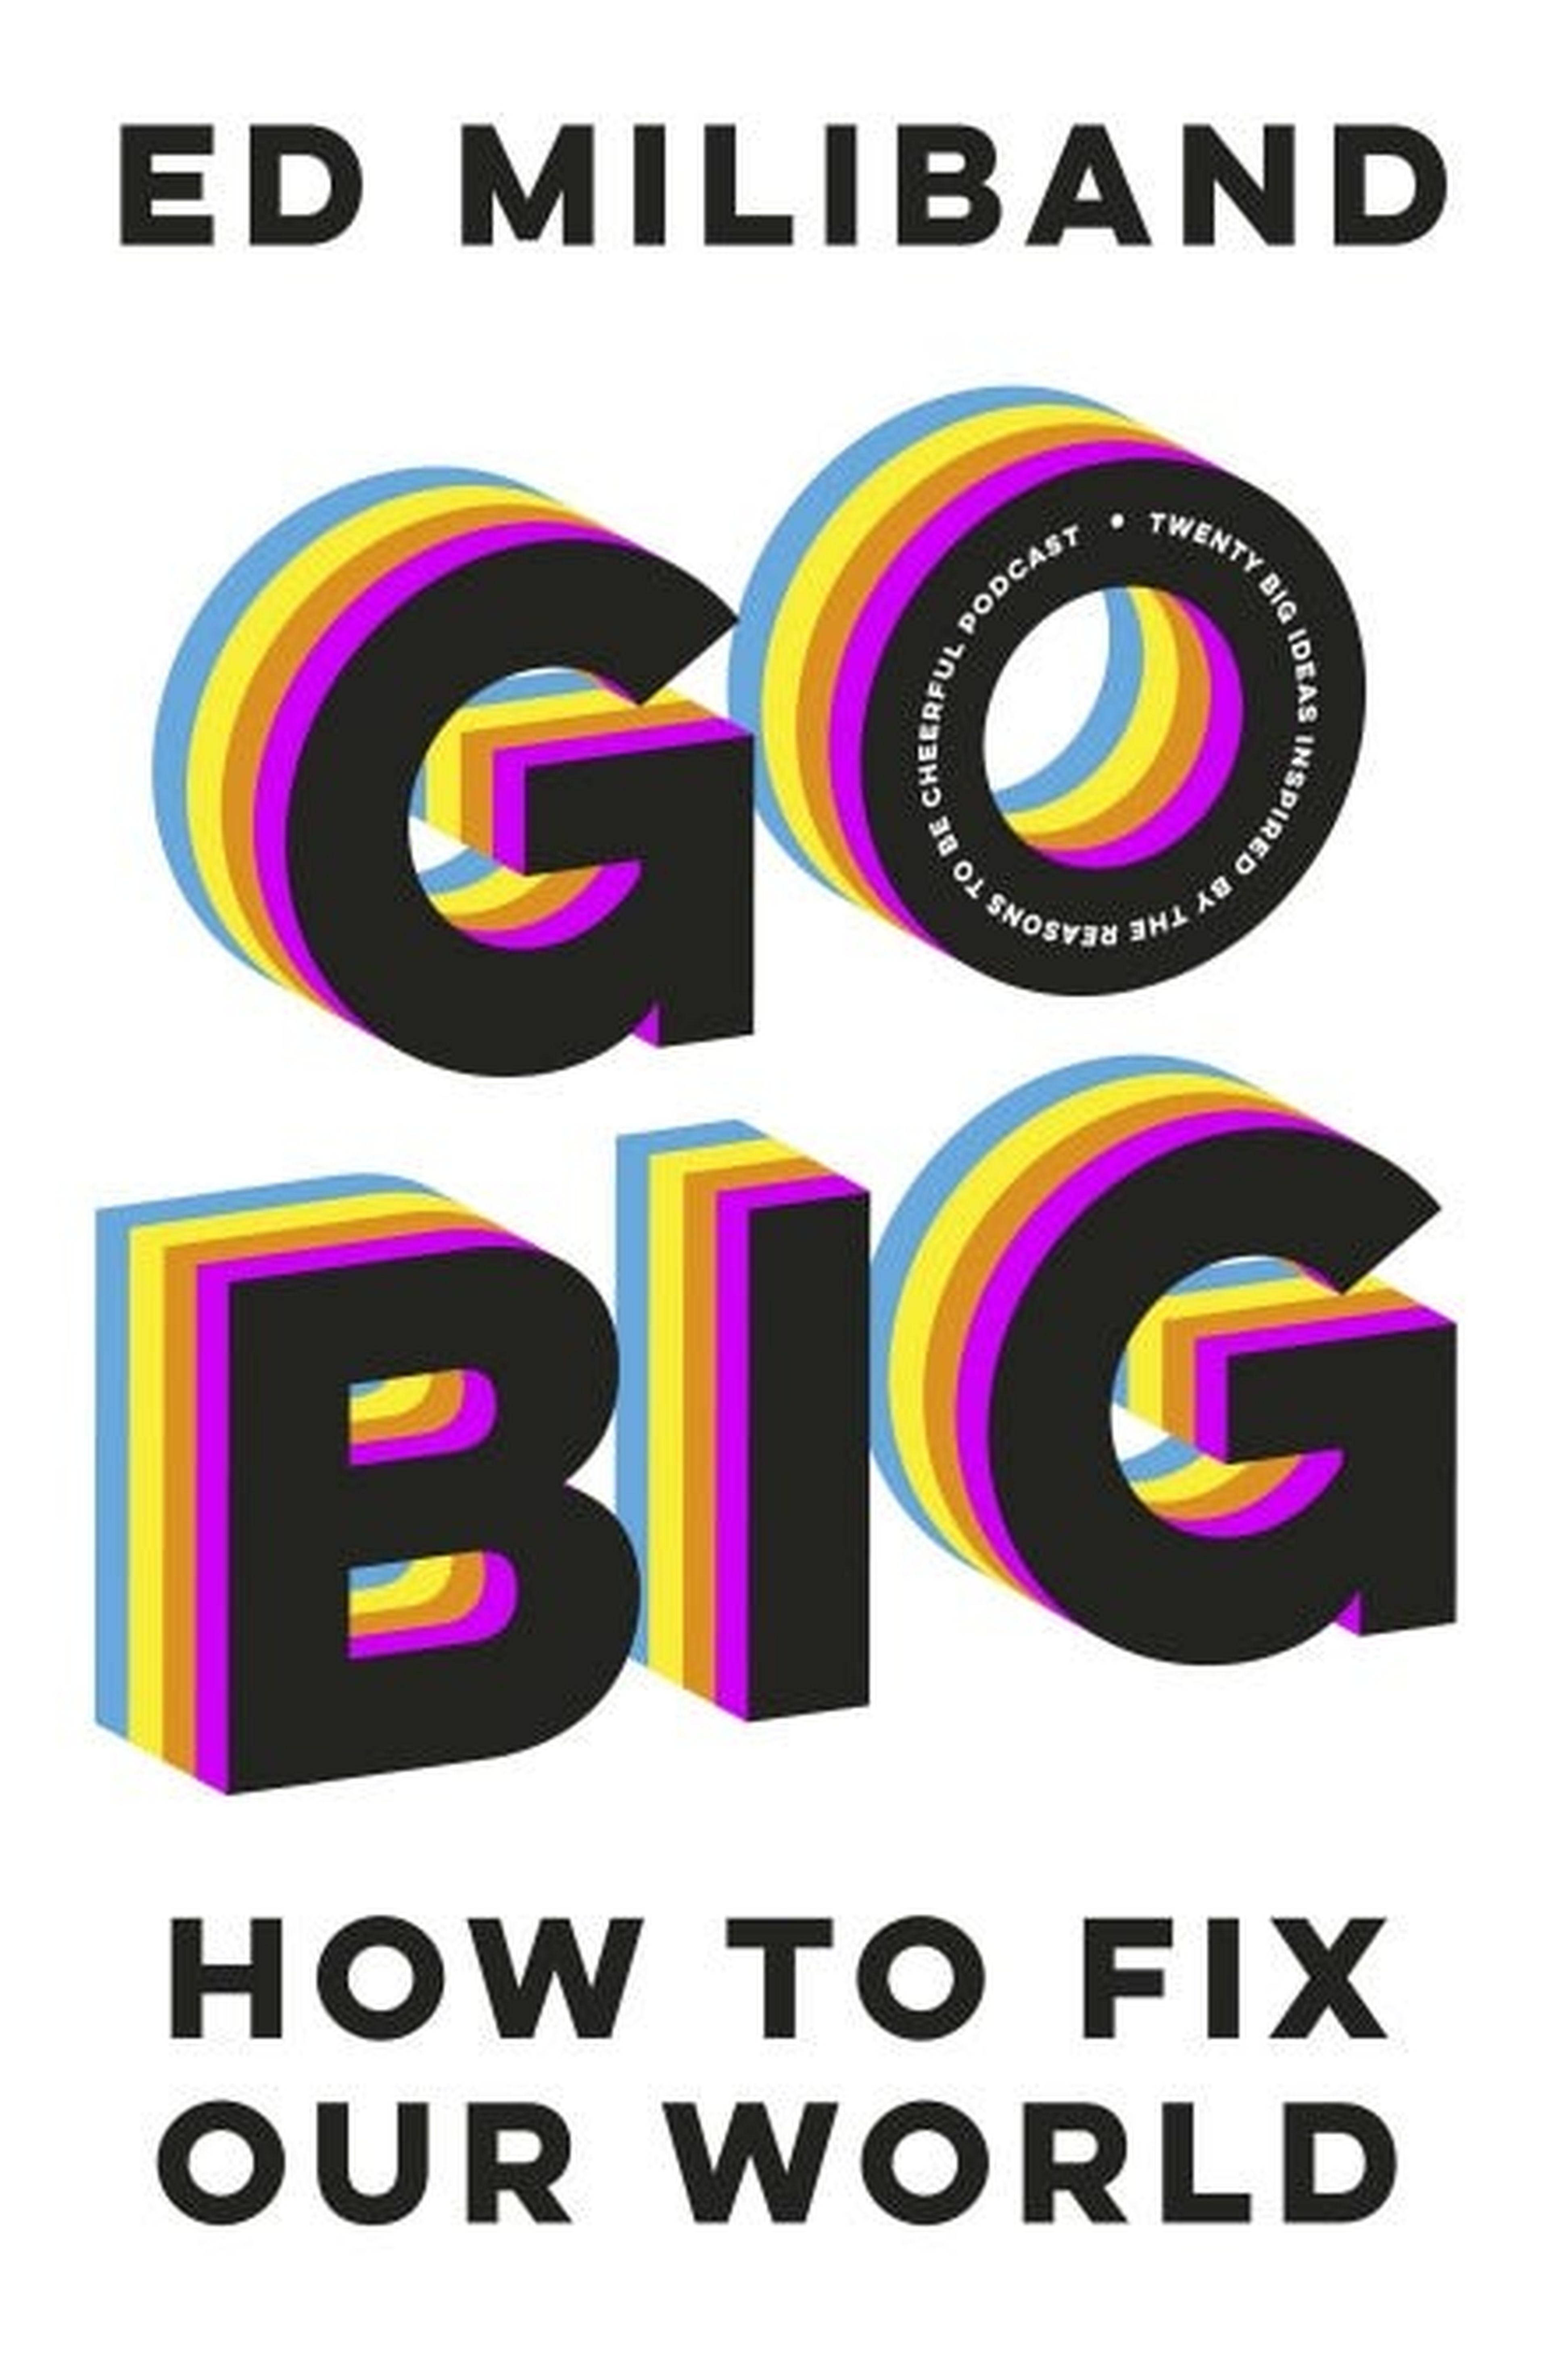 'Go Big: How to Fix Our World'